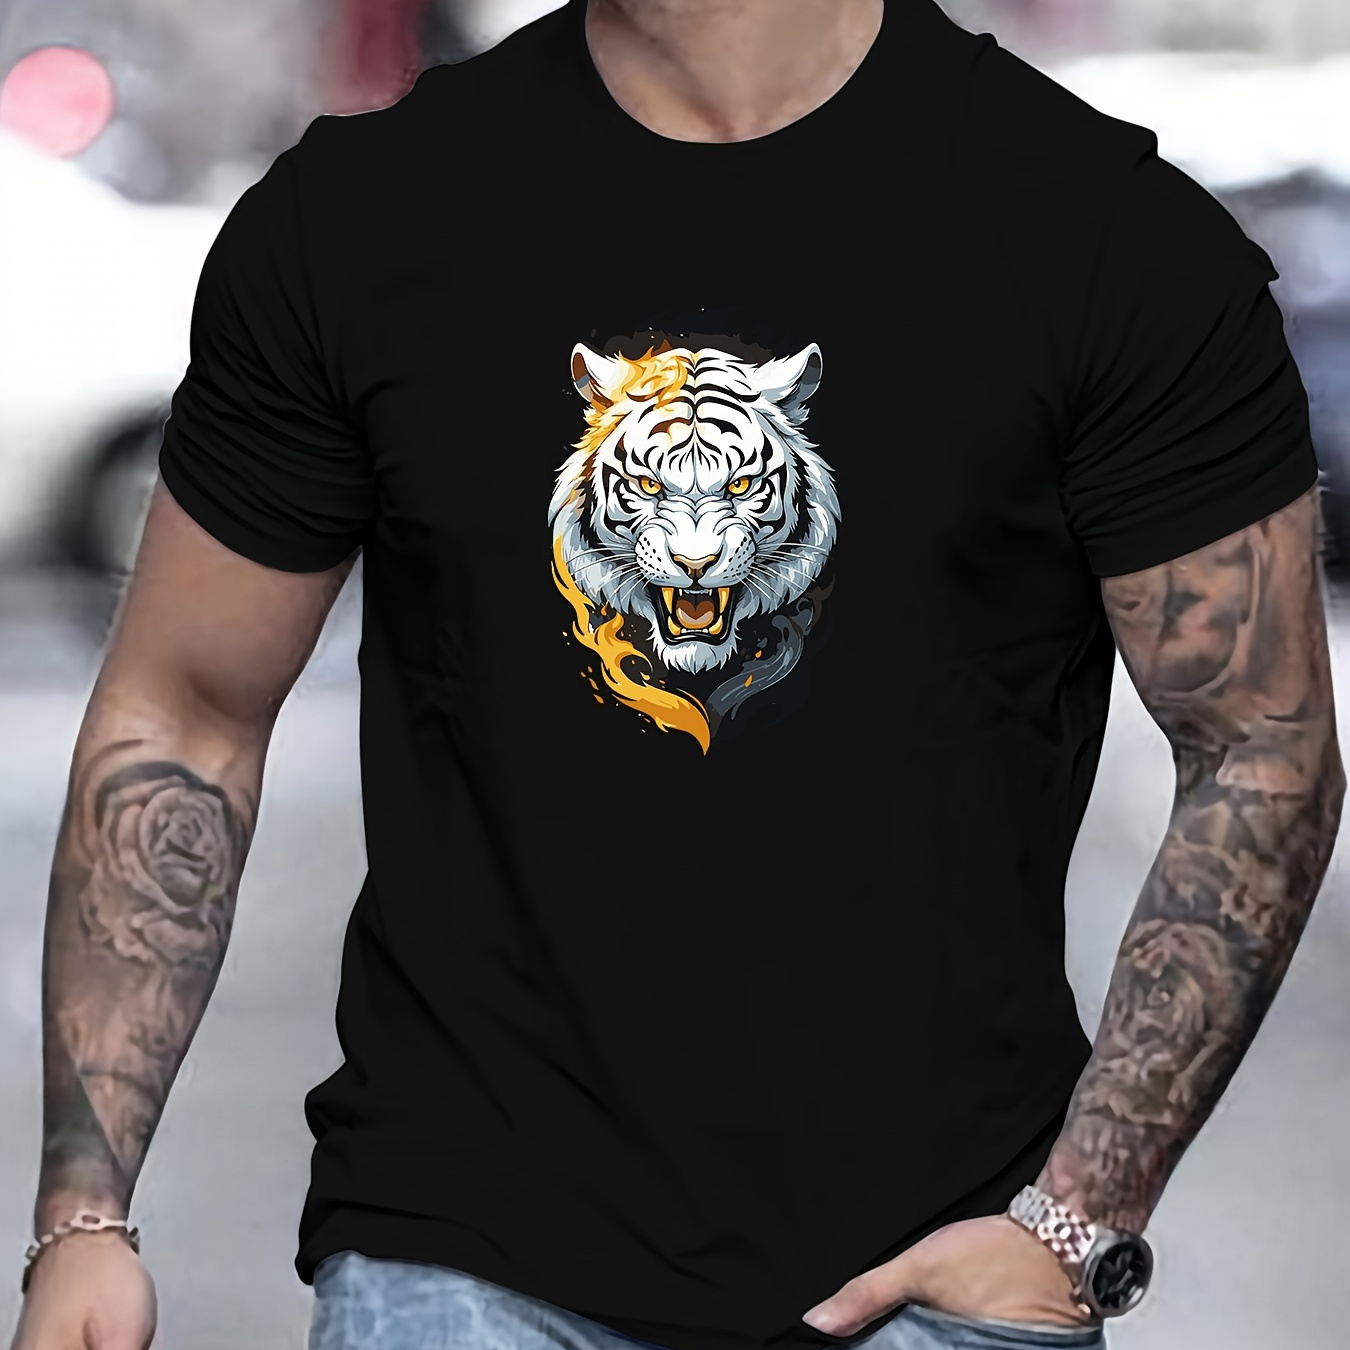 

Cartoon White Tiger Pattern Print Men's T-shirt Short Sleeve Crew Neck Tops Cotton Comfortable Breathable Spring Summer Clothing For Men